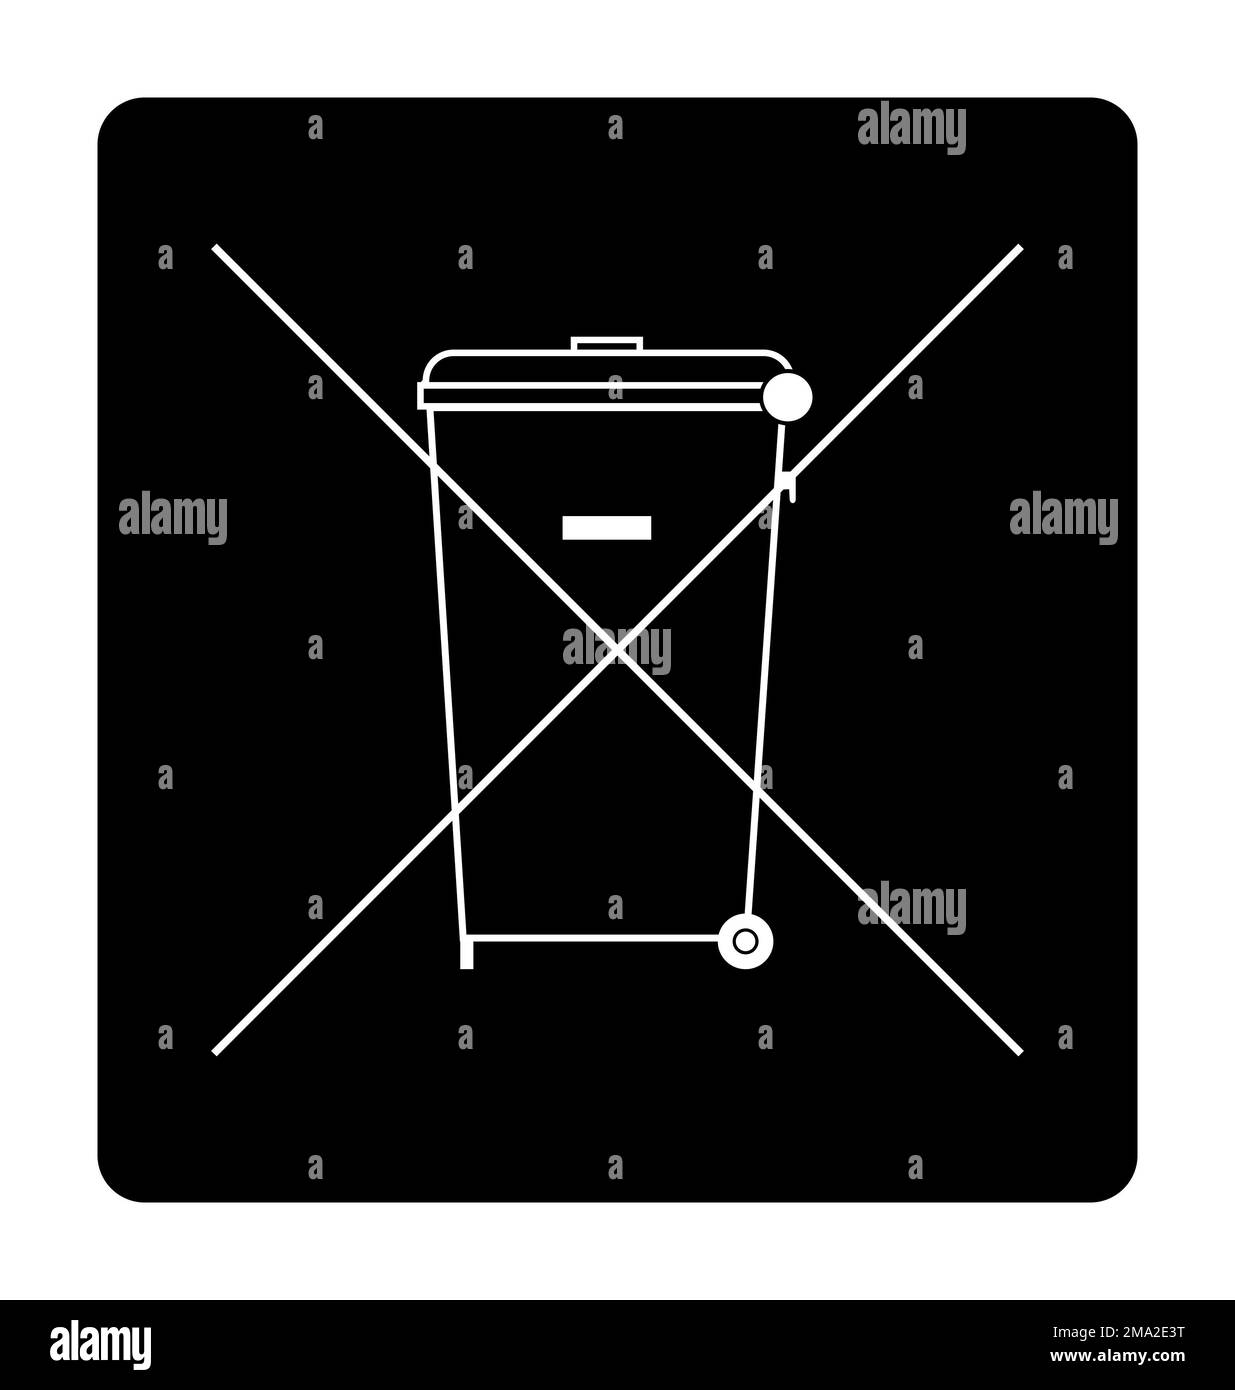 The Crossed Out Wheelie Bin Symbol , Waste Electrical and Electronic Equipment recycling sign. Do not throw in trash. Trash bin icon on black backgrou Stock Photo